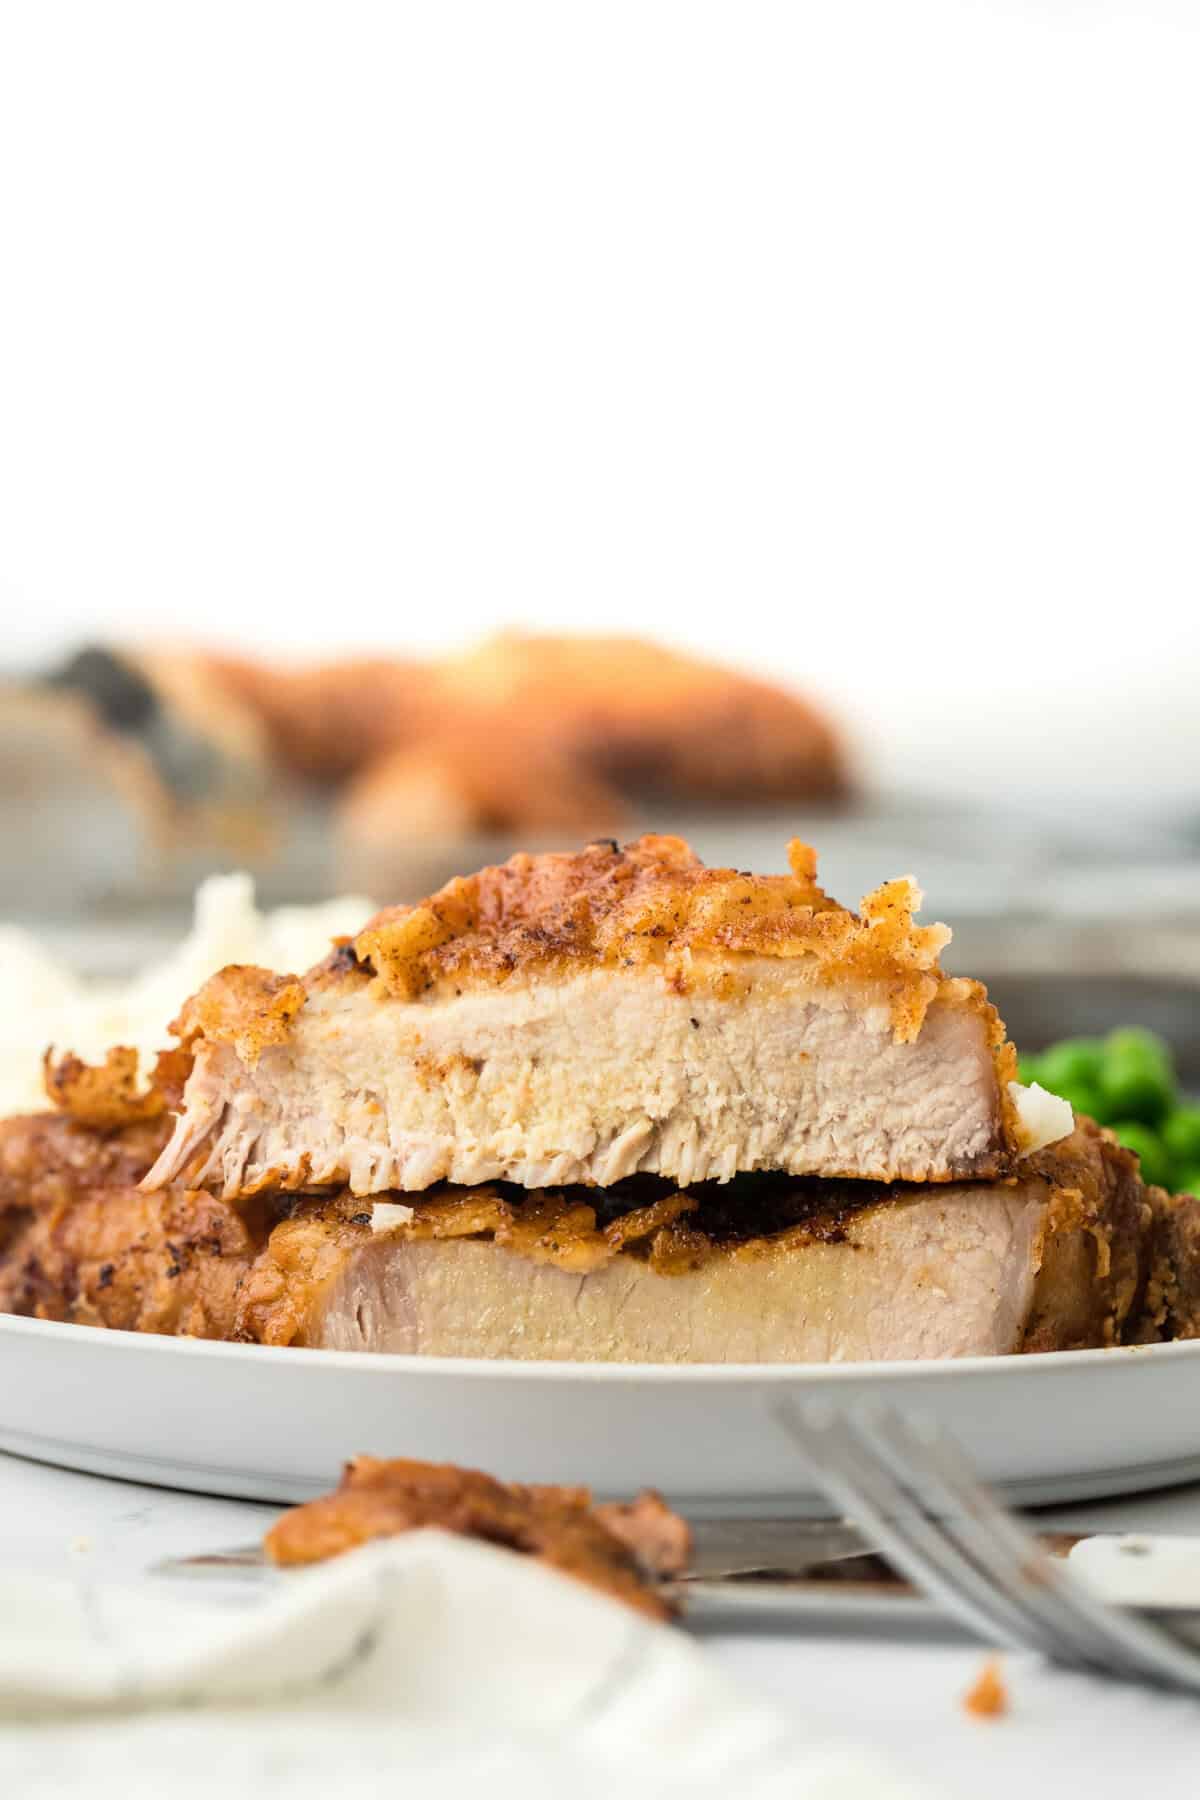 A southern fried pork chop cut in half to show the juicy texture inside on a white plate